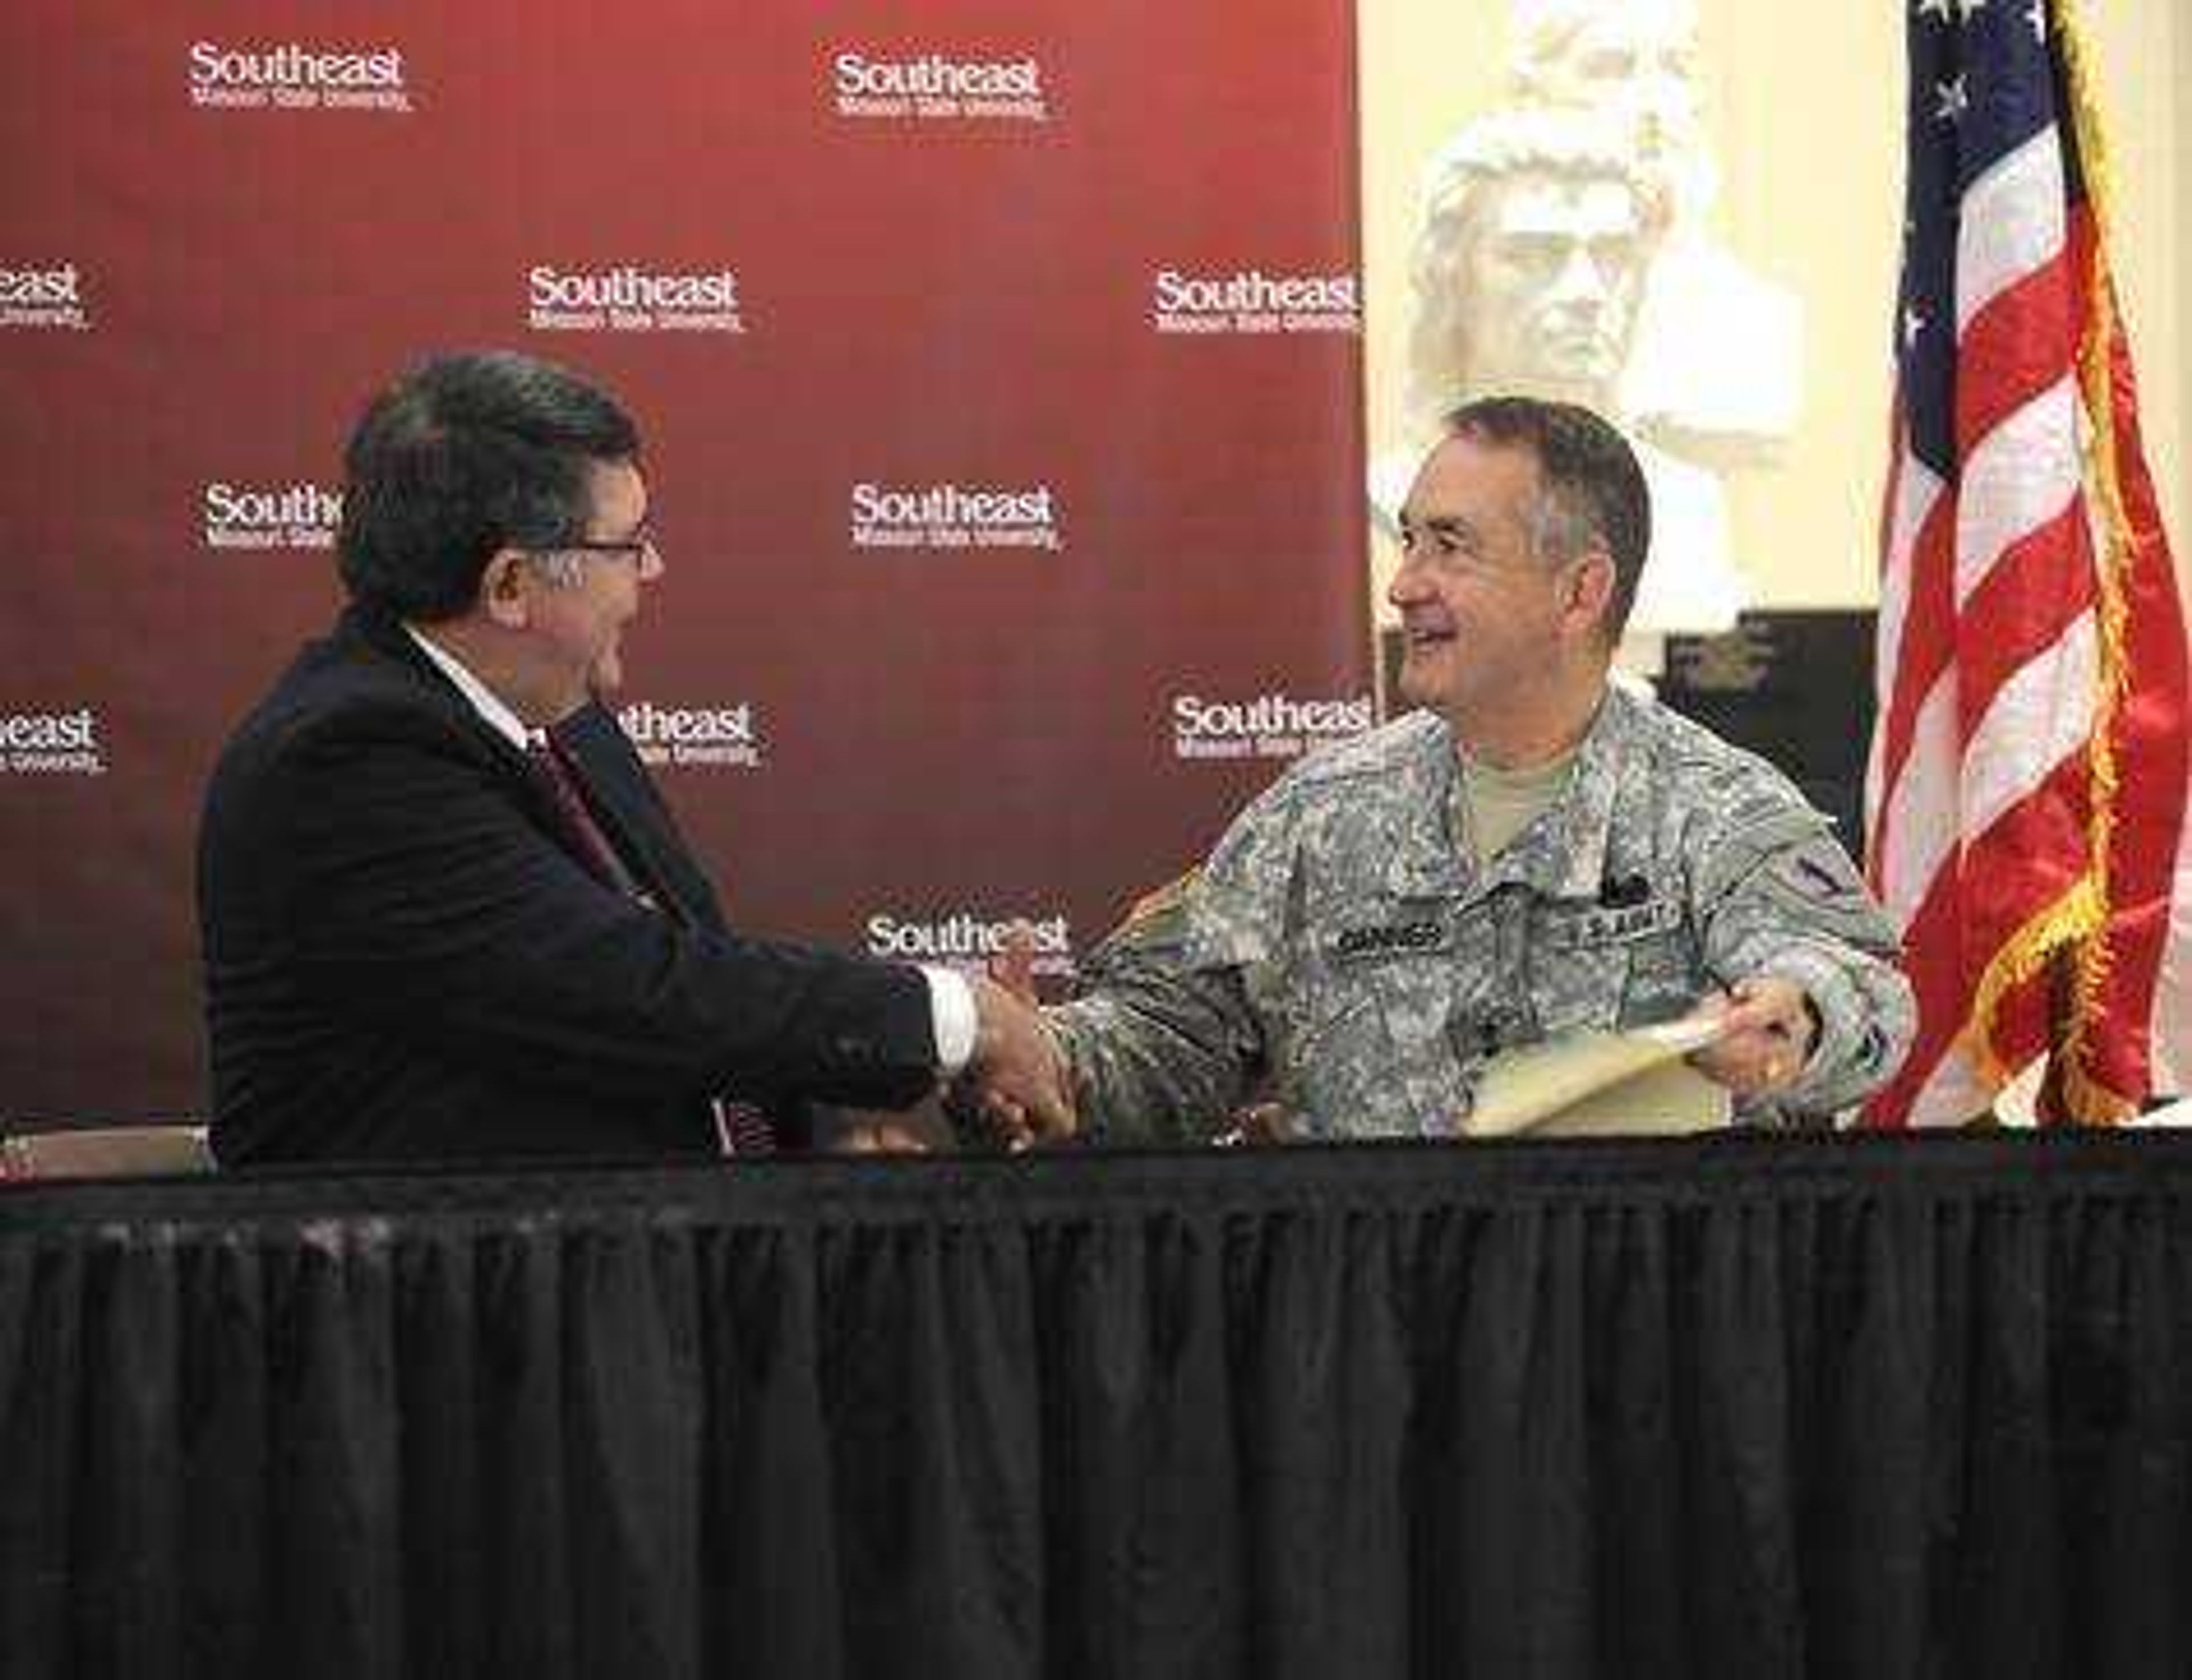 Dr. Kenneth W. Dobbins shakes hands with Maj. Gen. Stephen L. Danner, adjutant general of the Missourri Army NAtional Guard, after signing agreement to launch Show Me Gold Officer Leadership Program. Southeast Missourian photo.